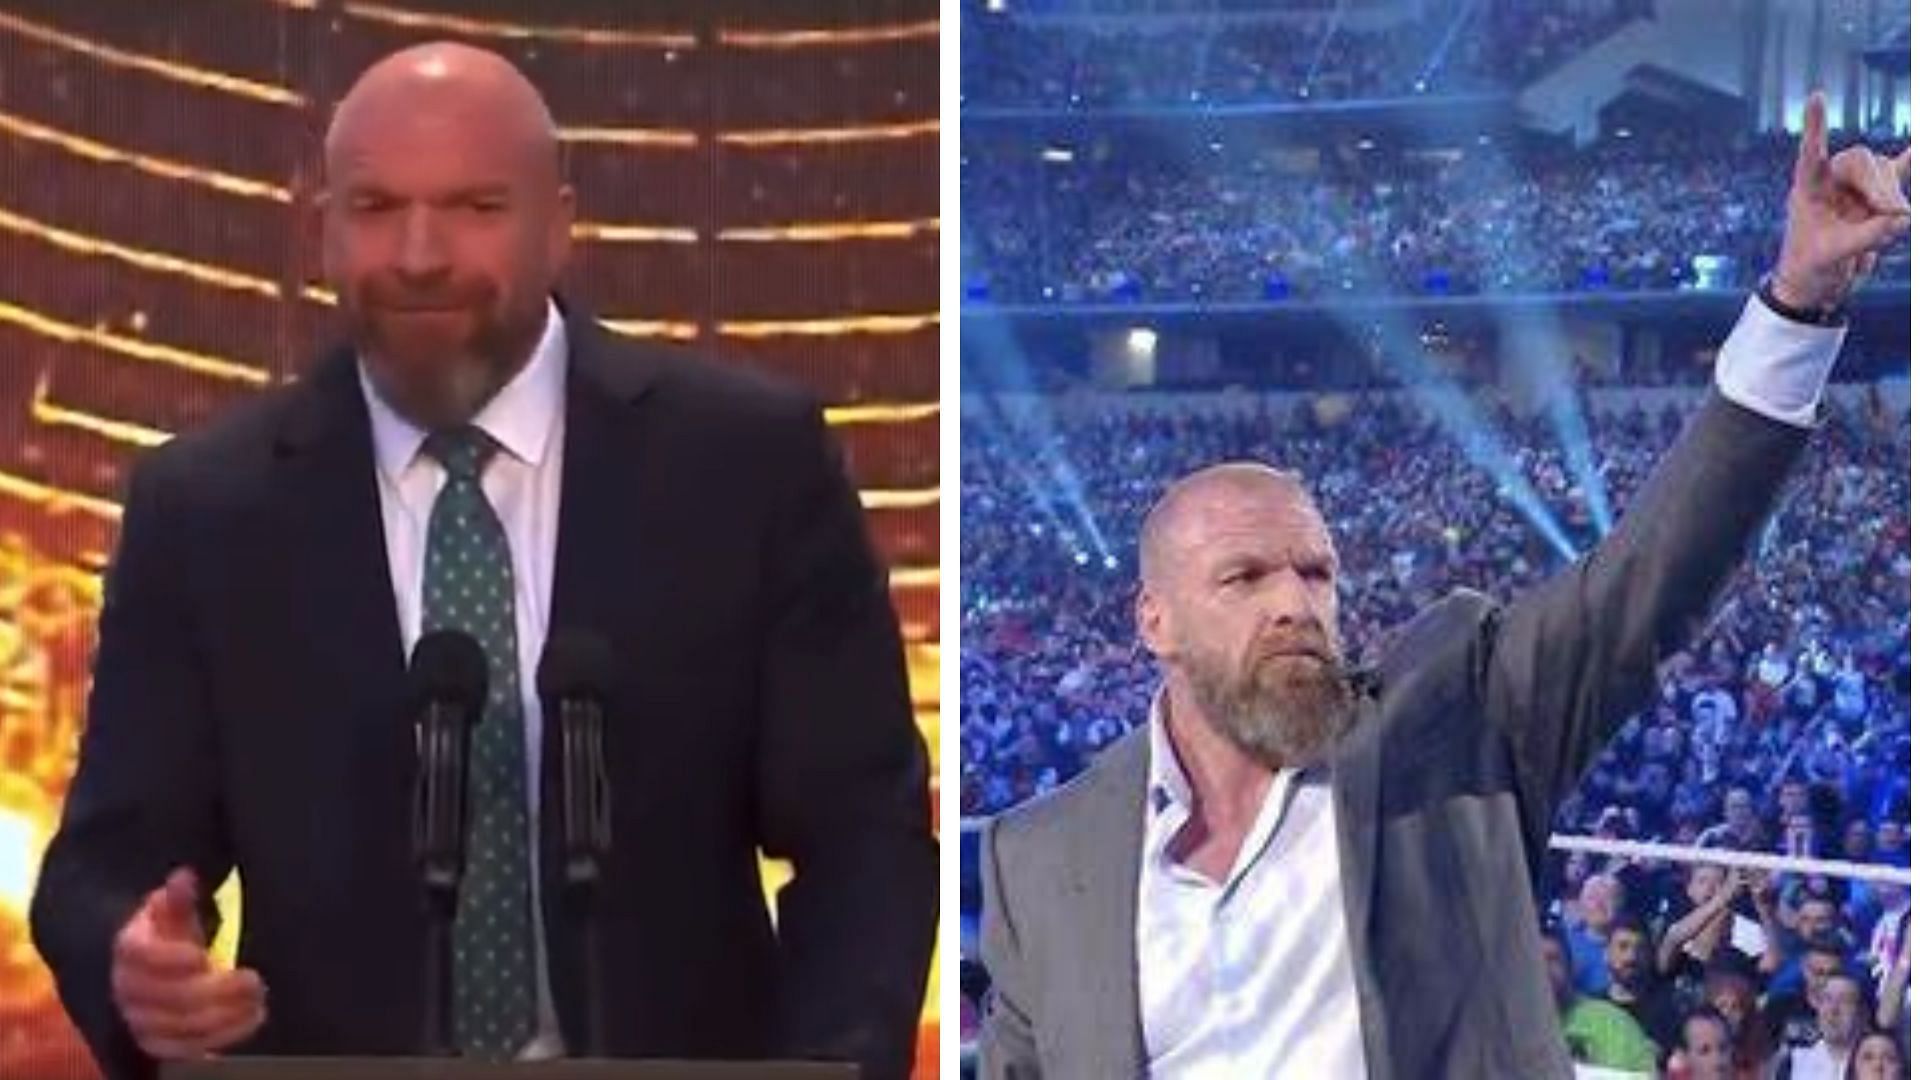 Triple H is currently the COO of WWE